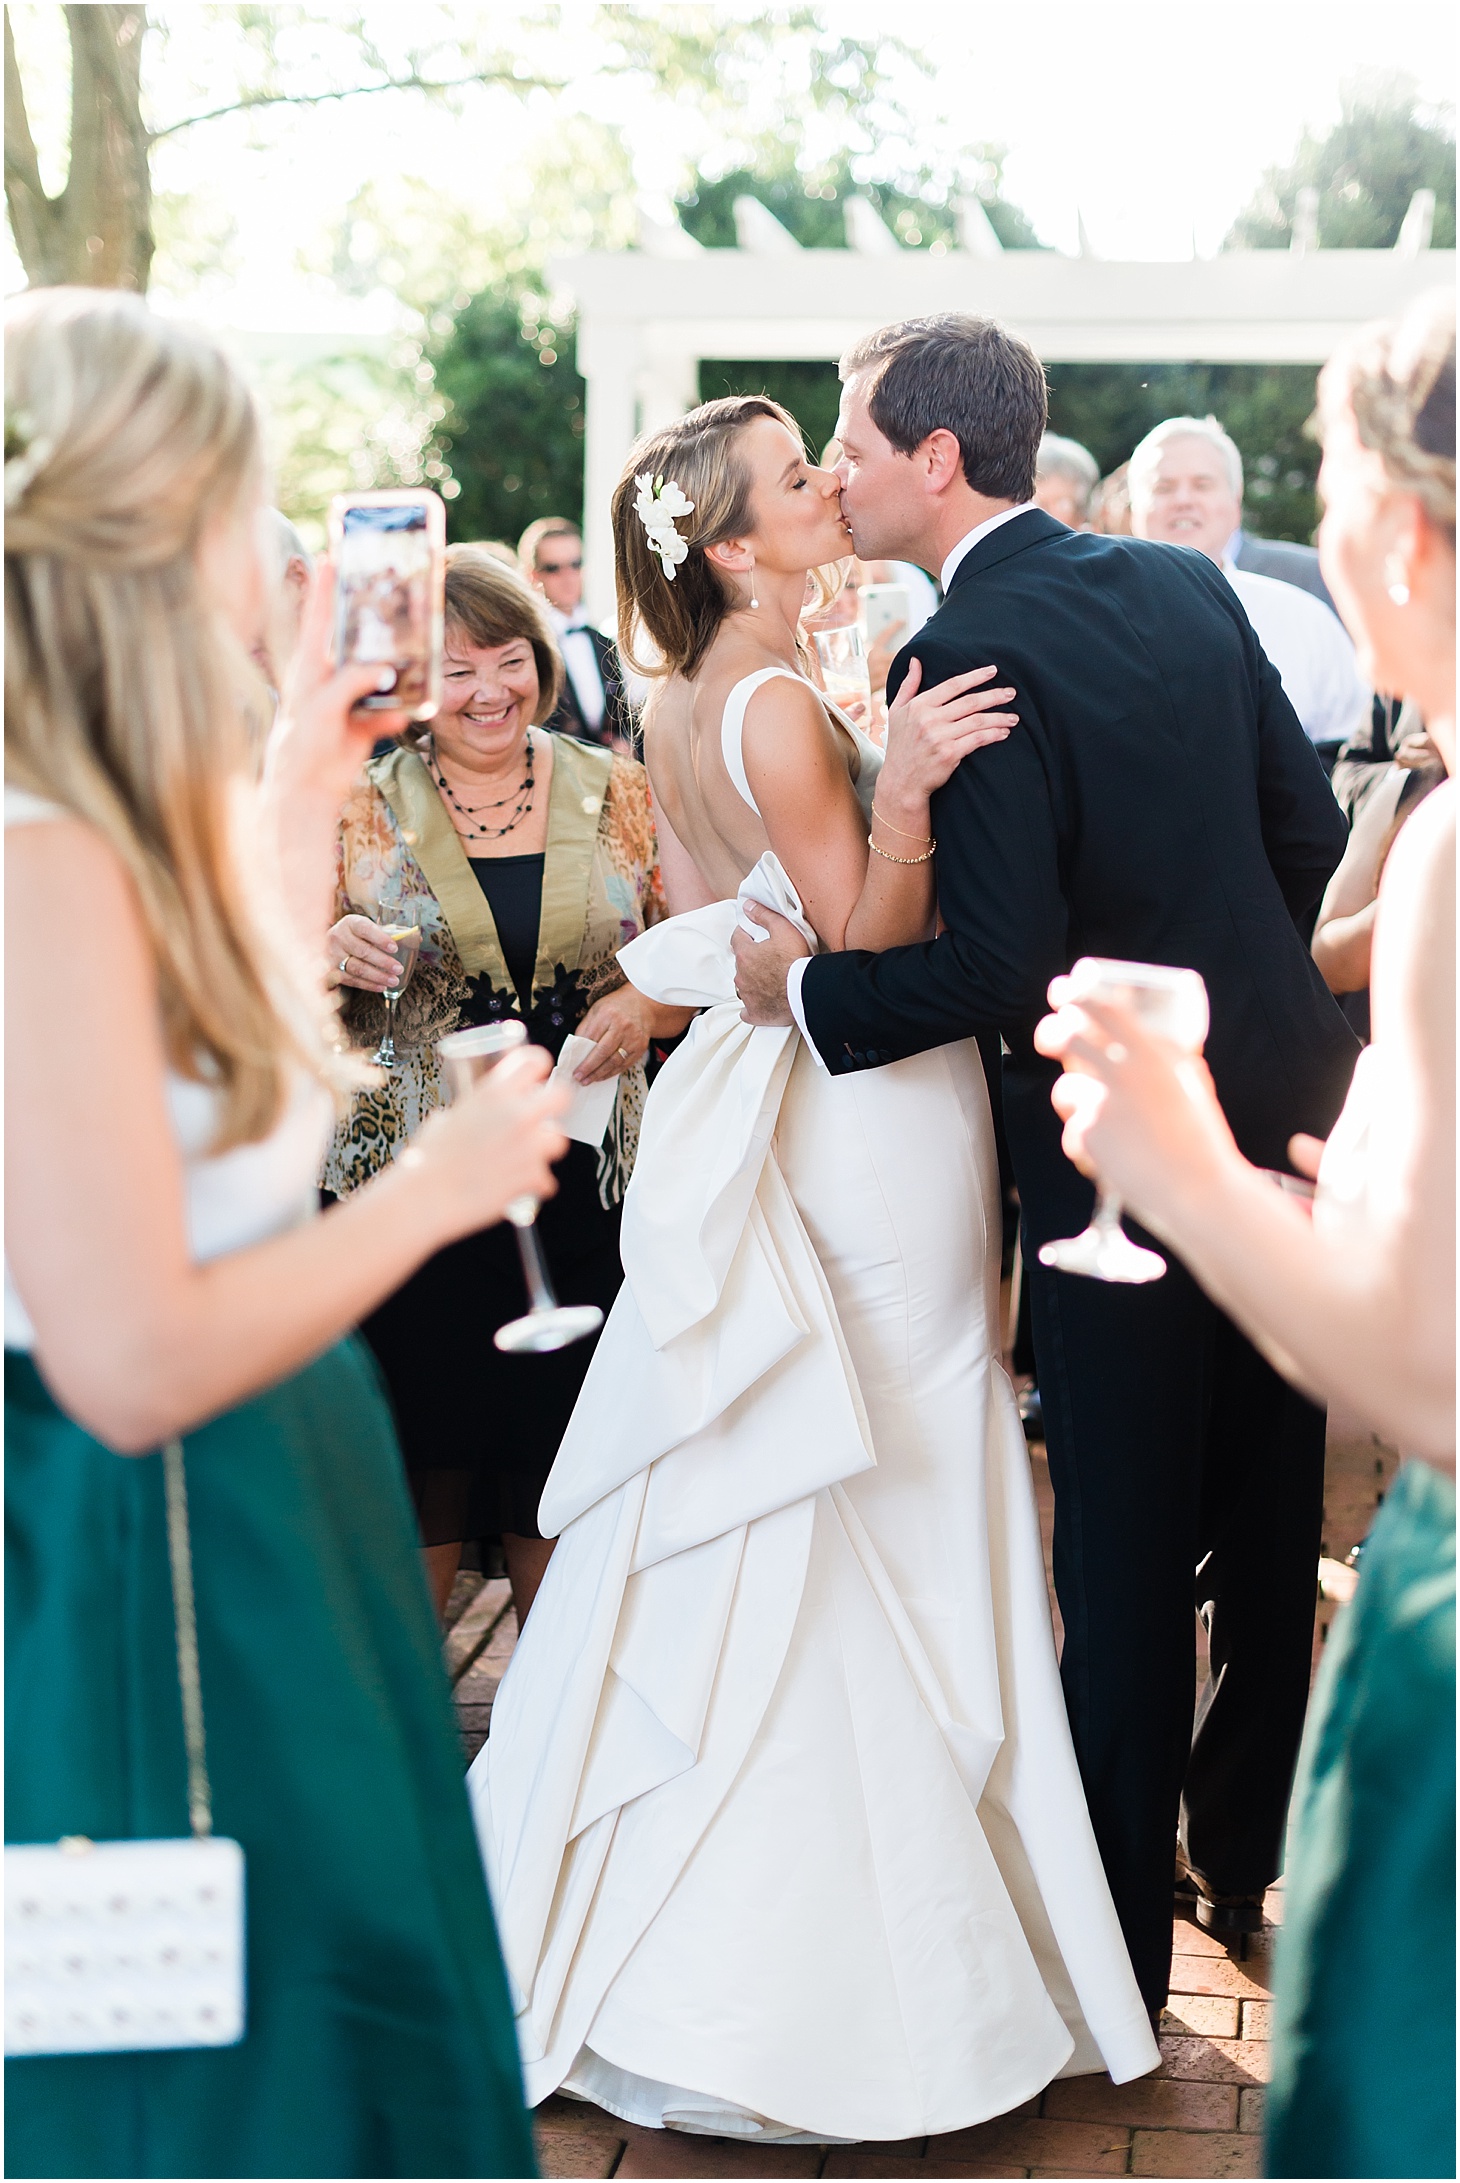 Summer Wedding Reception in Orange VA, Green and White Summer Wedding at The Inn at Willow Grove, Ceremony at St. Isidore the Farmer Catholic Church, Sarah Bradshaw Photography, DC Wedding Photographer